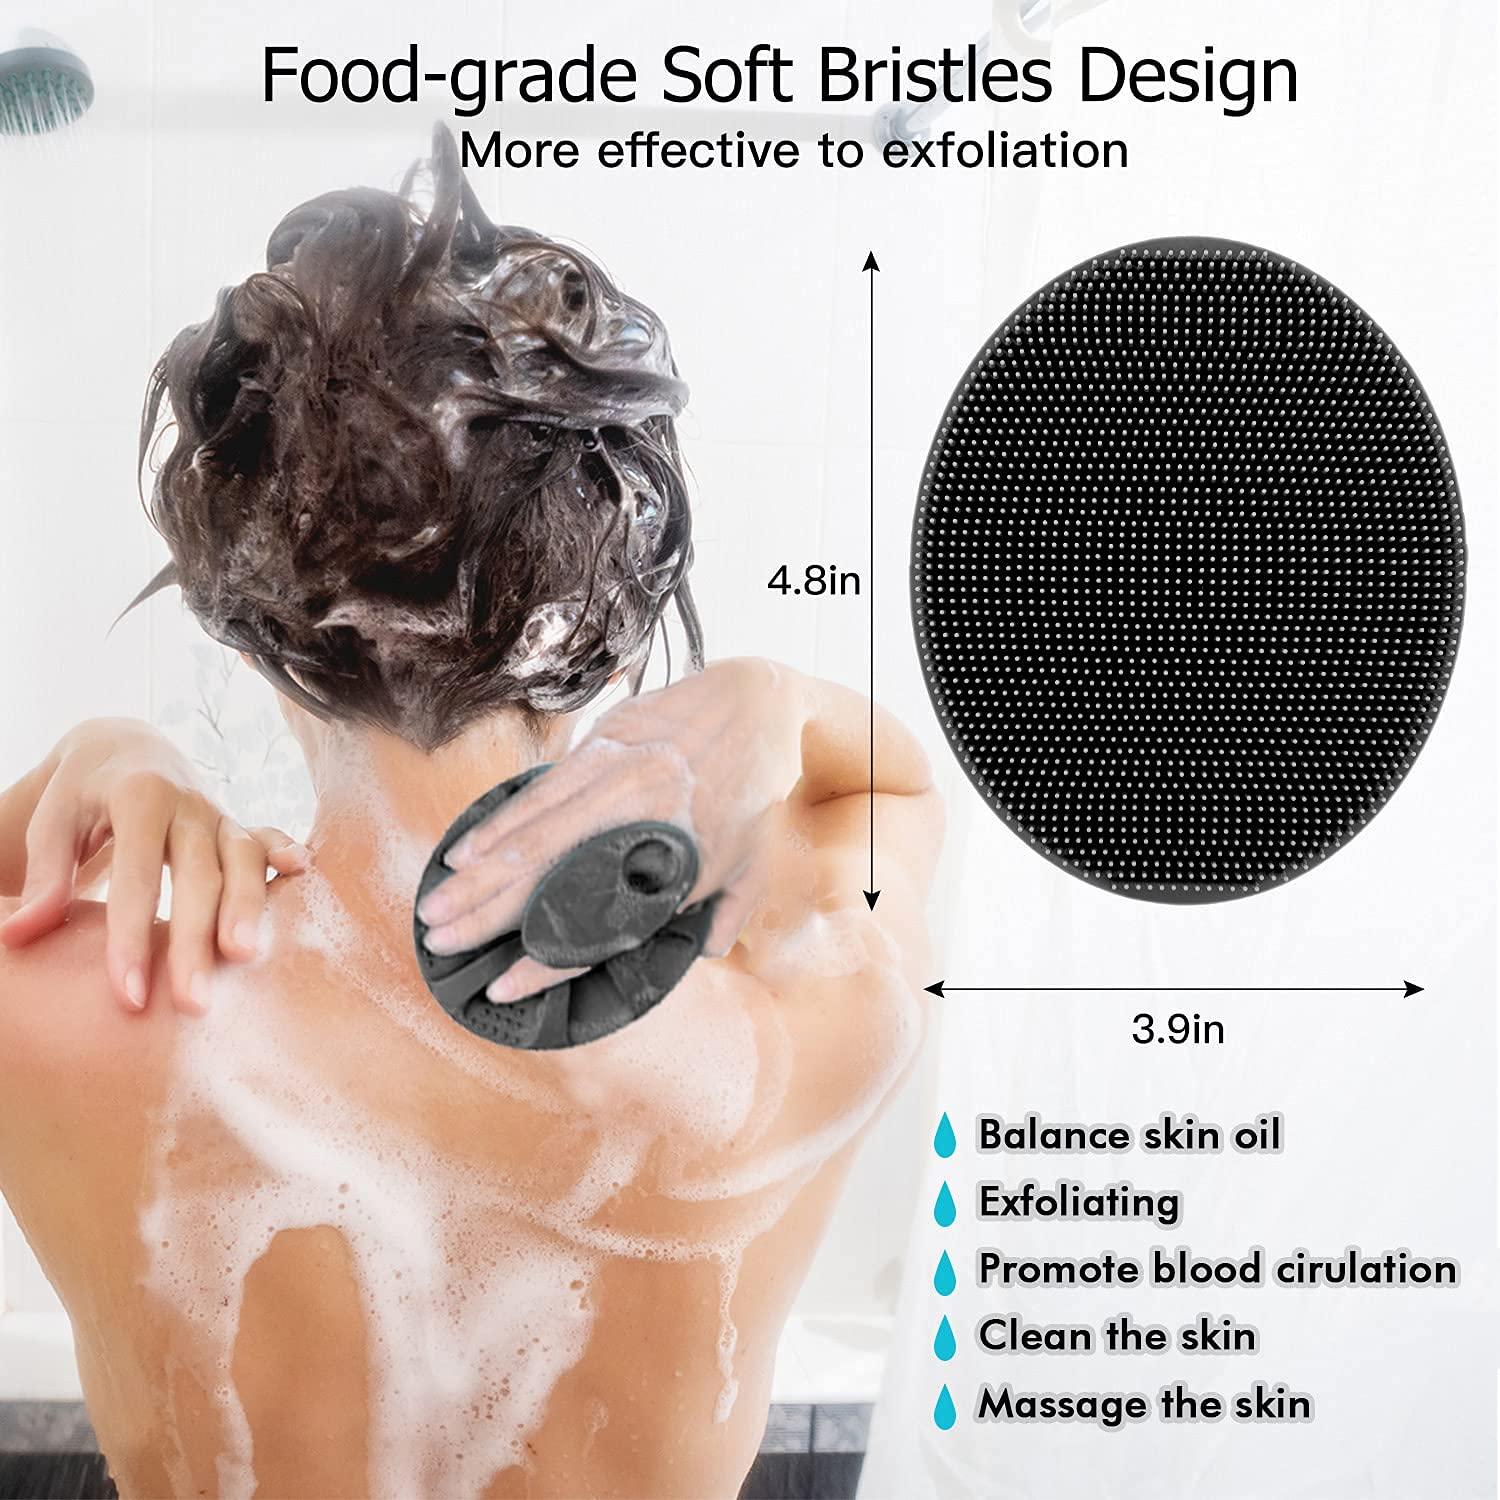 Metene Soft Silicone Body Scrubber, Exfoliating Shower Scrubber for Cleansing Skin, Lathers Well, Size: One size, Black